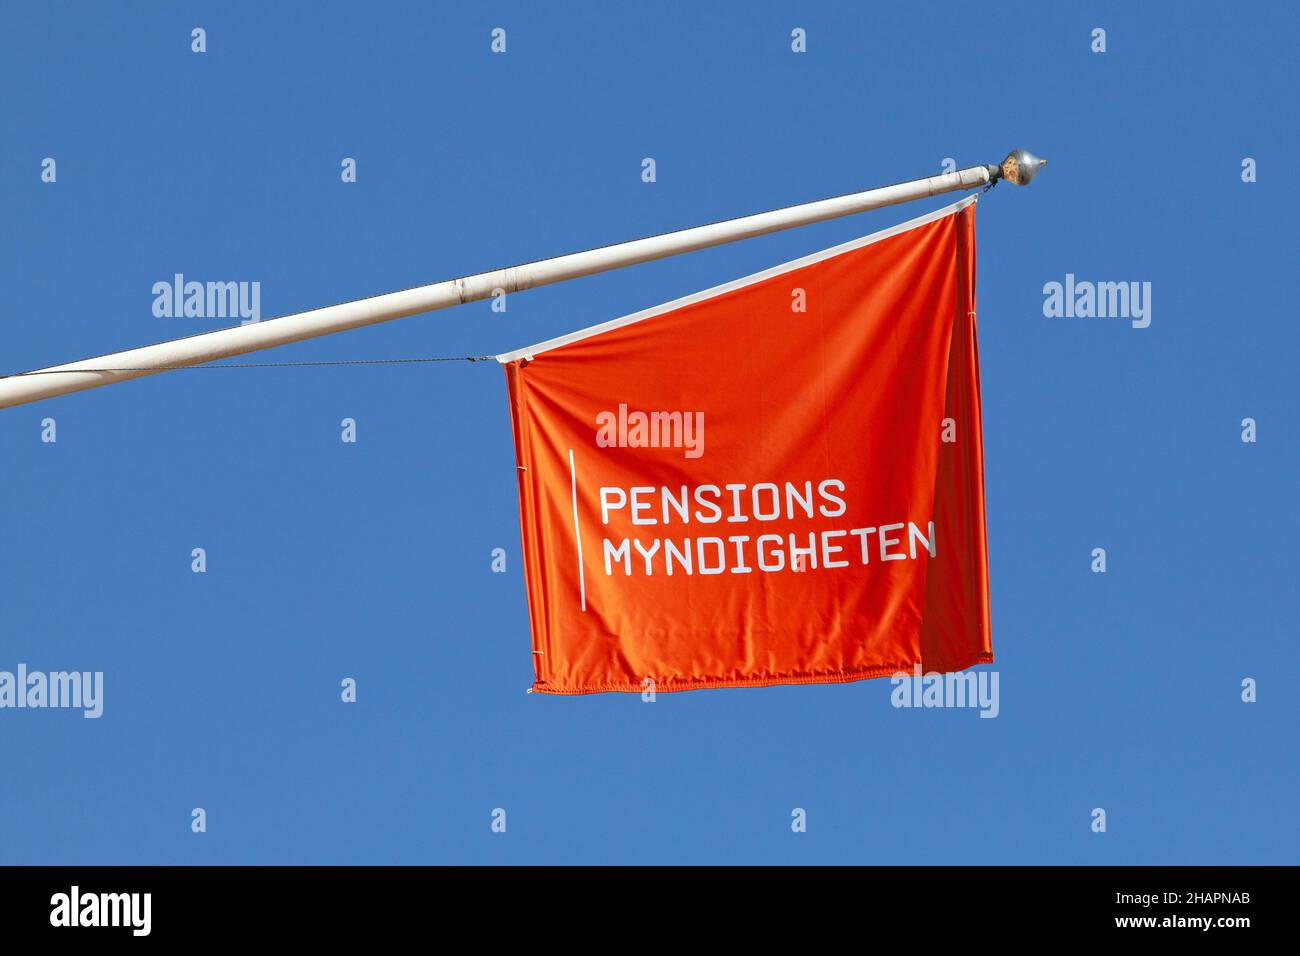 Stockholm, Sweden - March 25, 2021: A flag with the logo of The Swedish Pensions Agency that manage the Swedish citizens pension payments and plans. Stock Photo